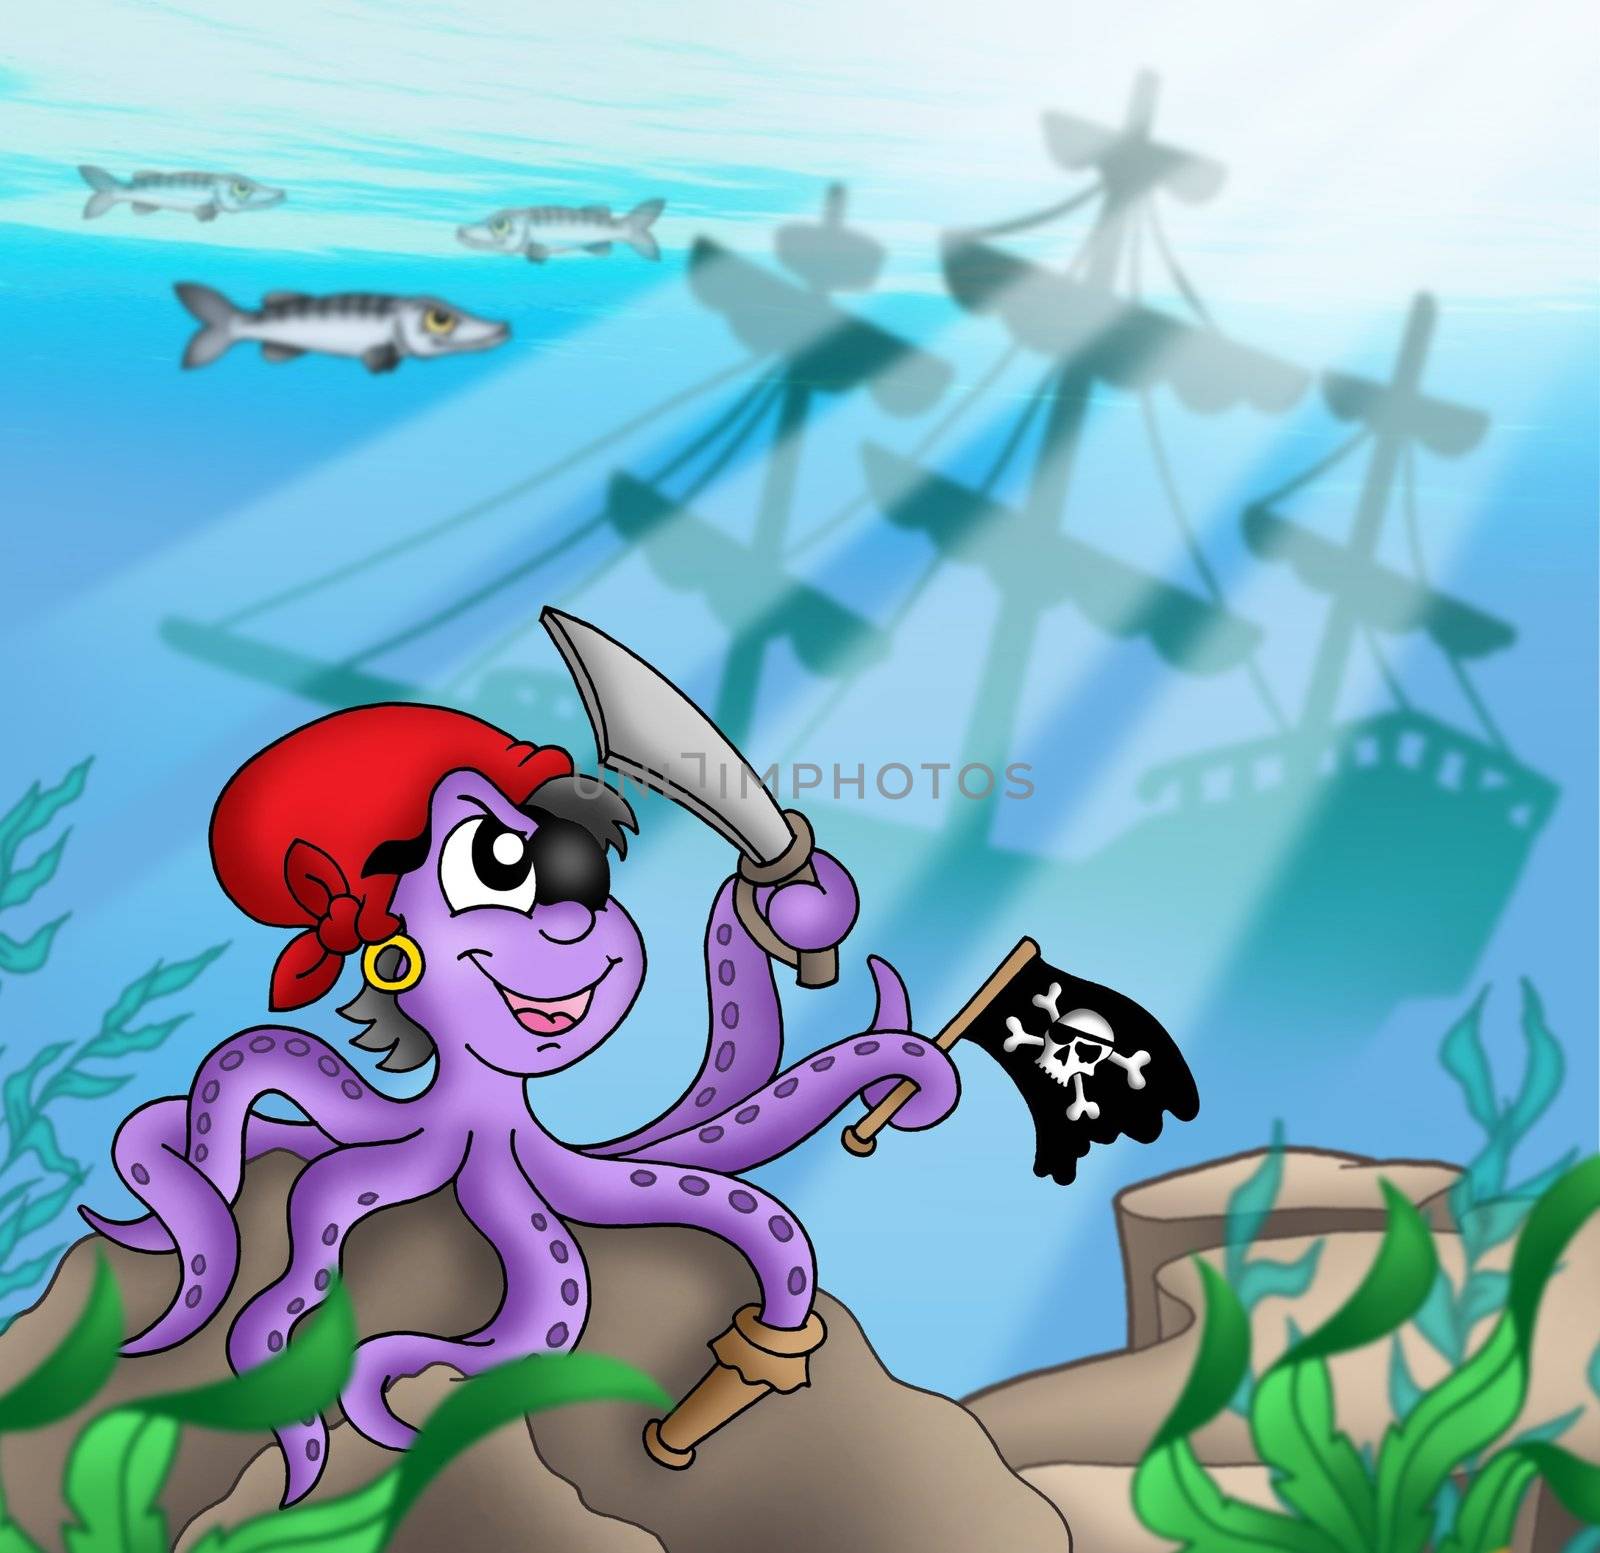 Pirate octopus near ship underwater - color illustration.